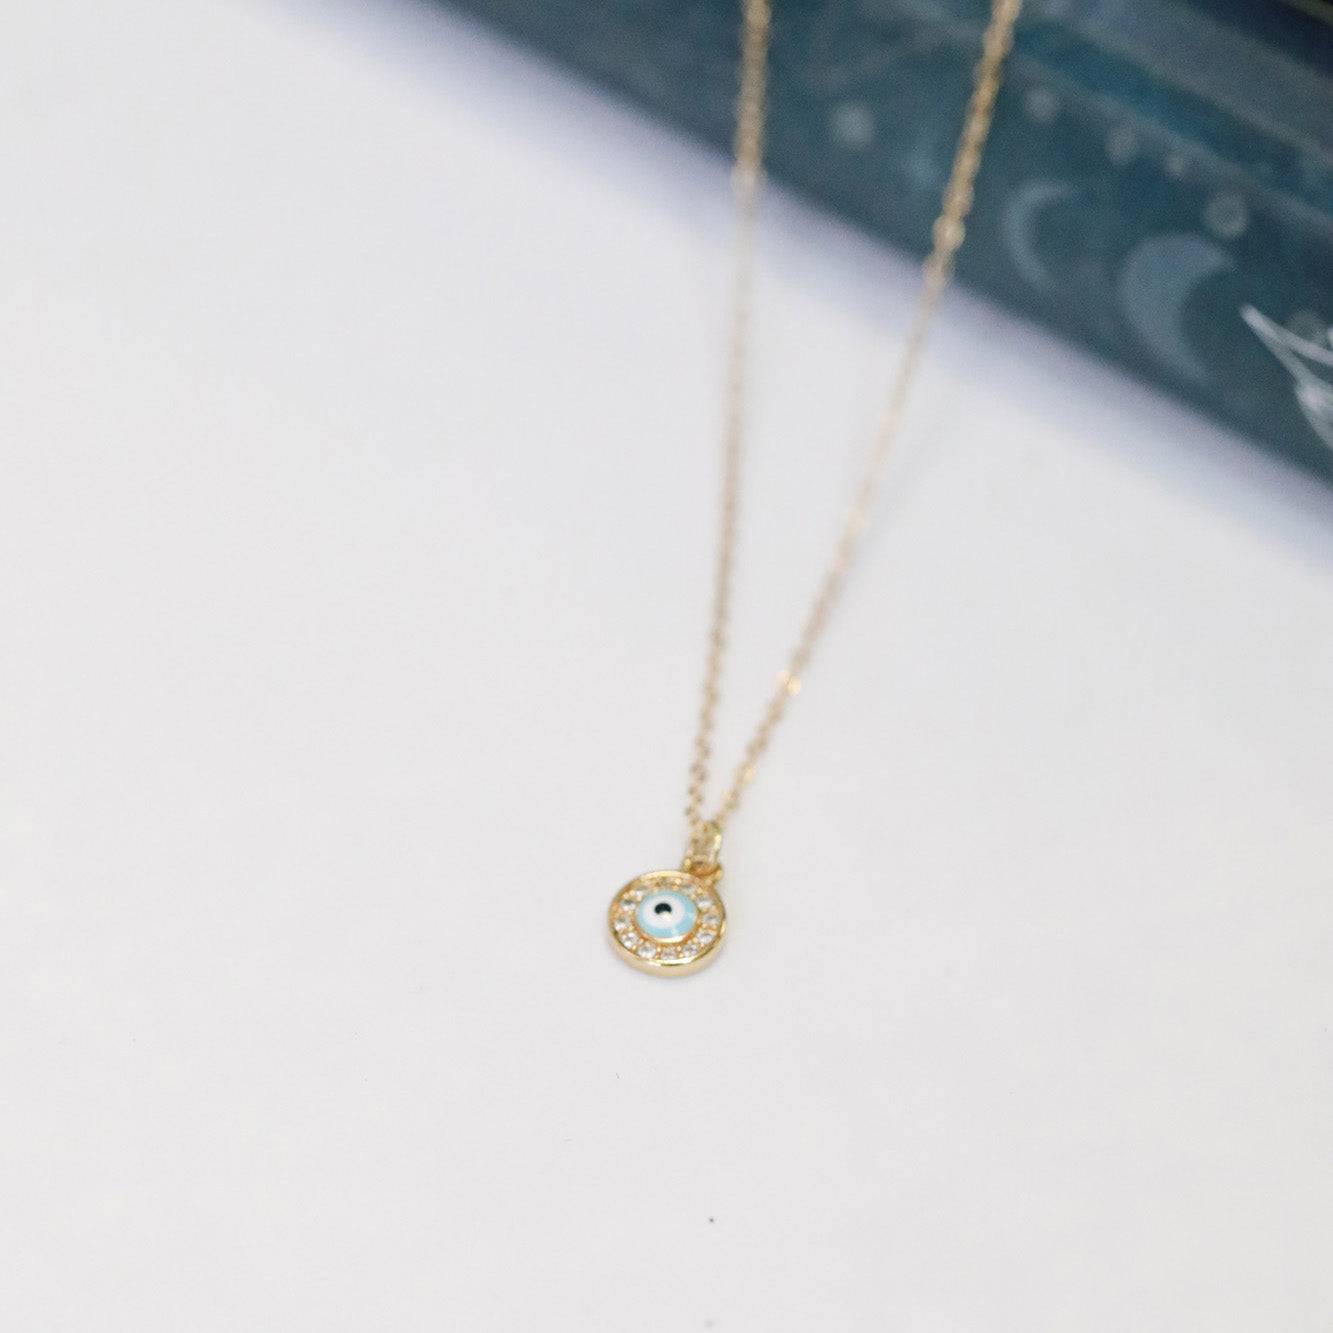 Evil Eye Charm Necklace - The Gilded Witch